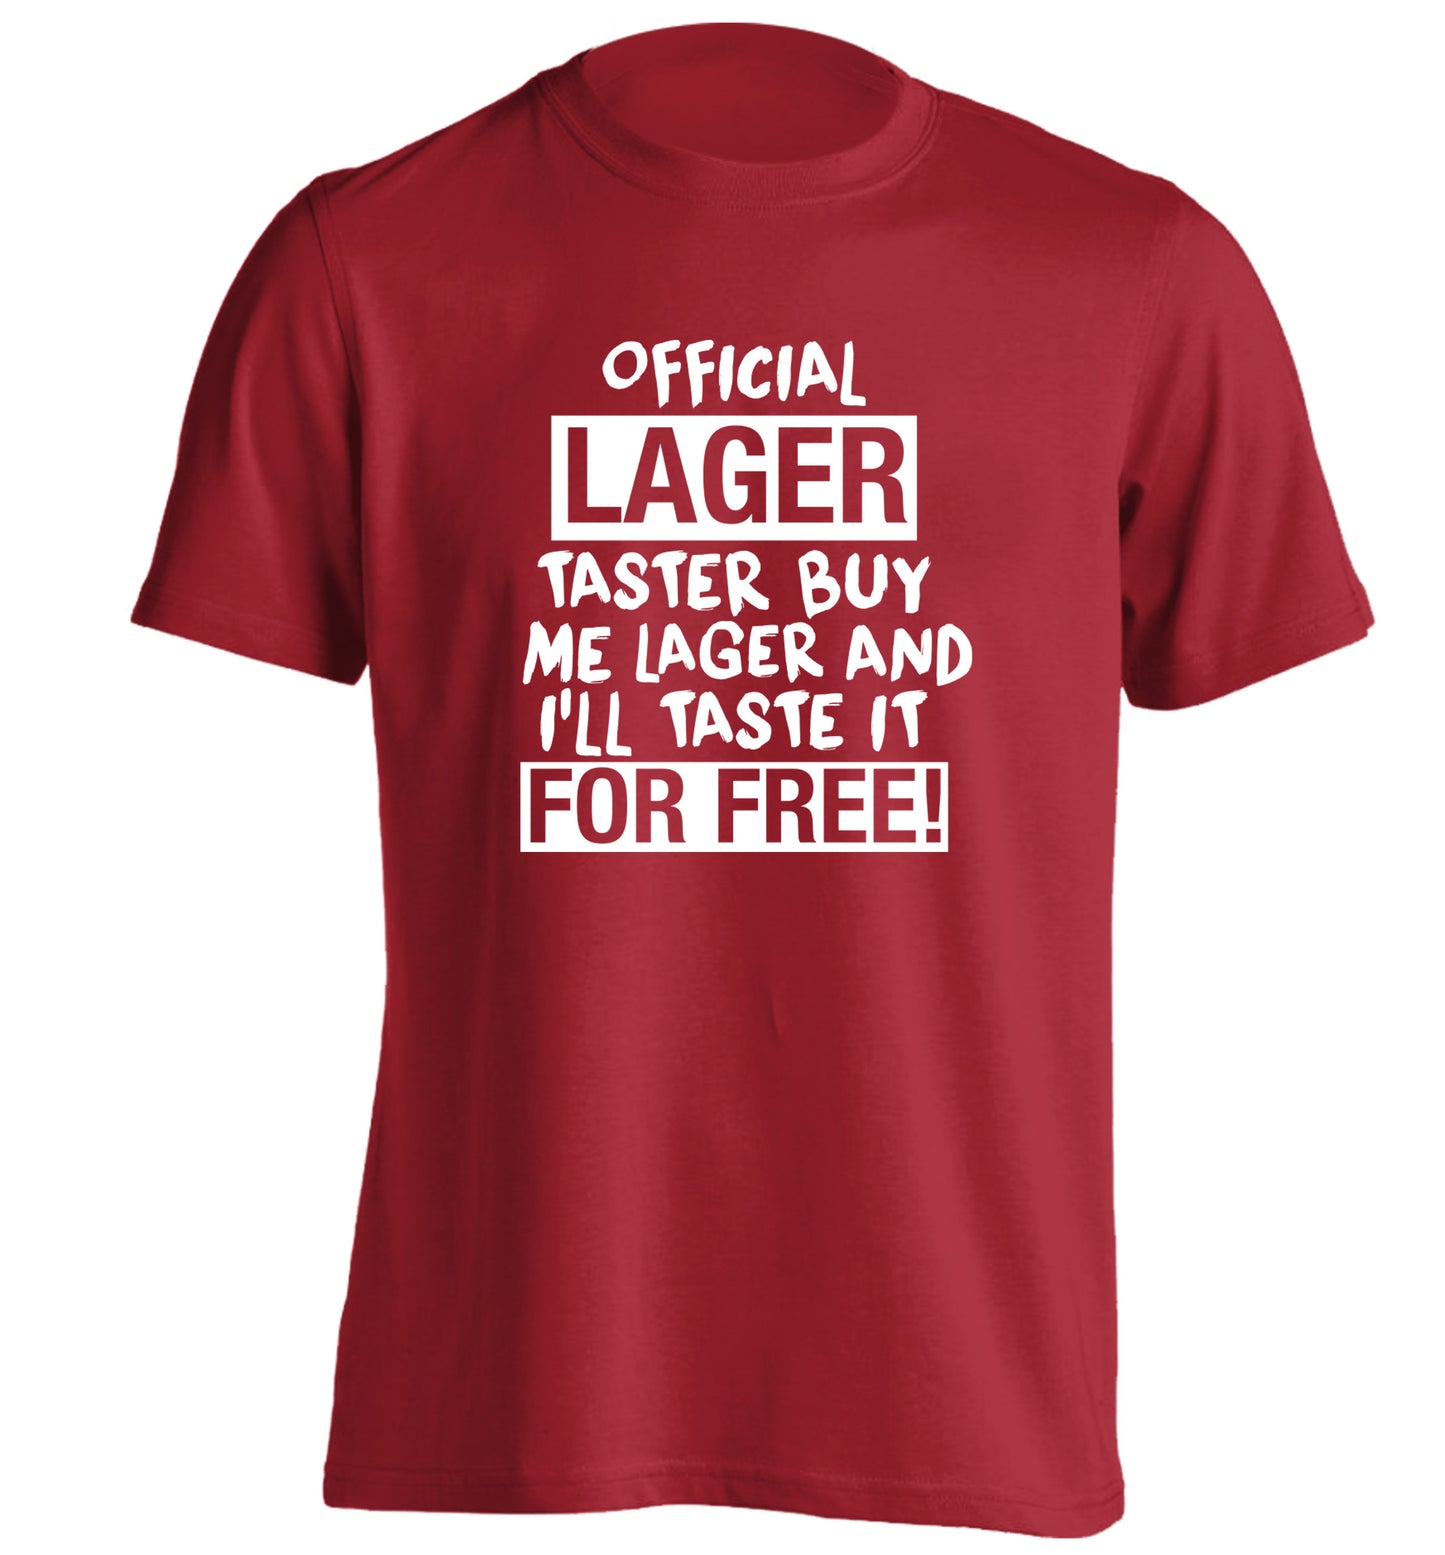 Official lager taster buy me lager and I'll taste it for free! adults unisex red Tshirt 2XL